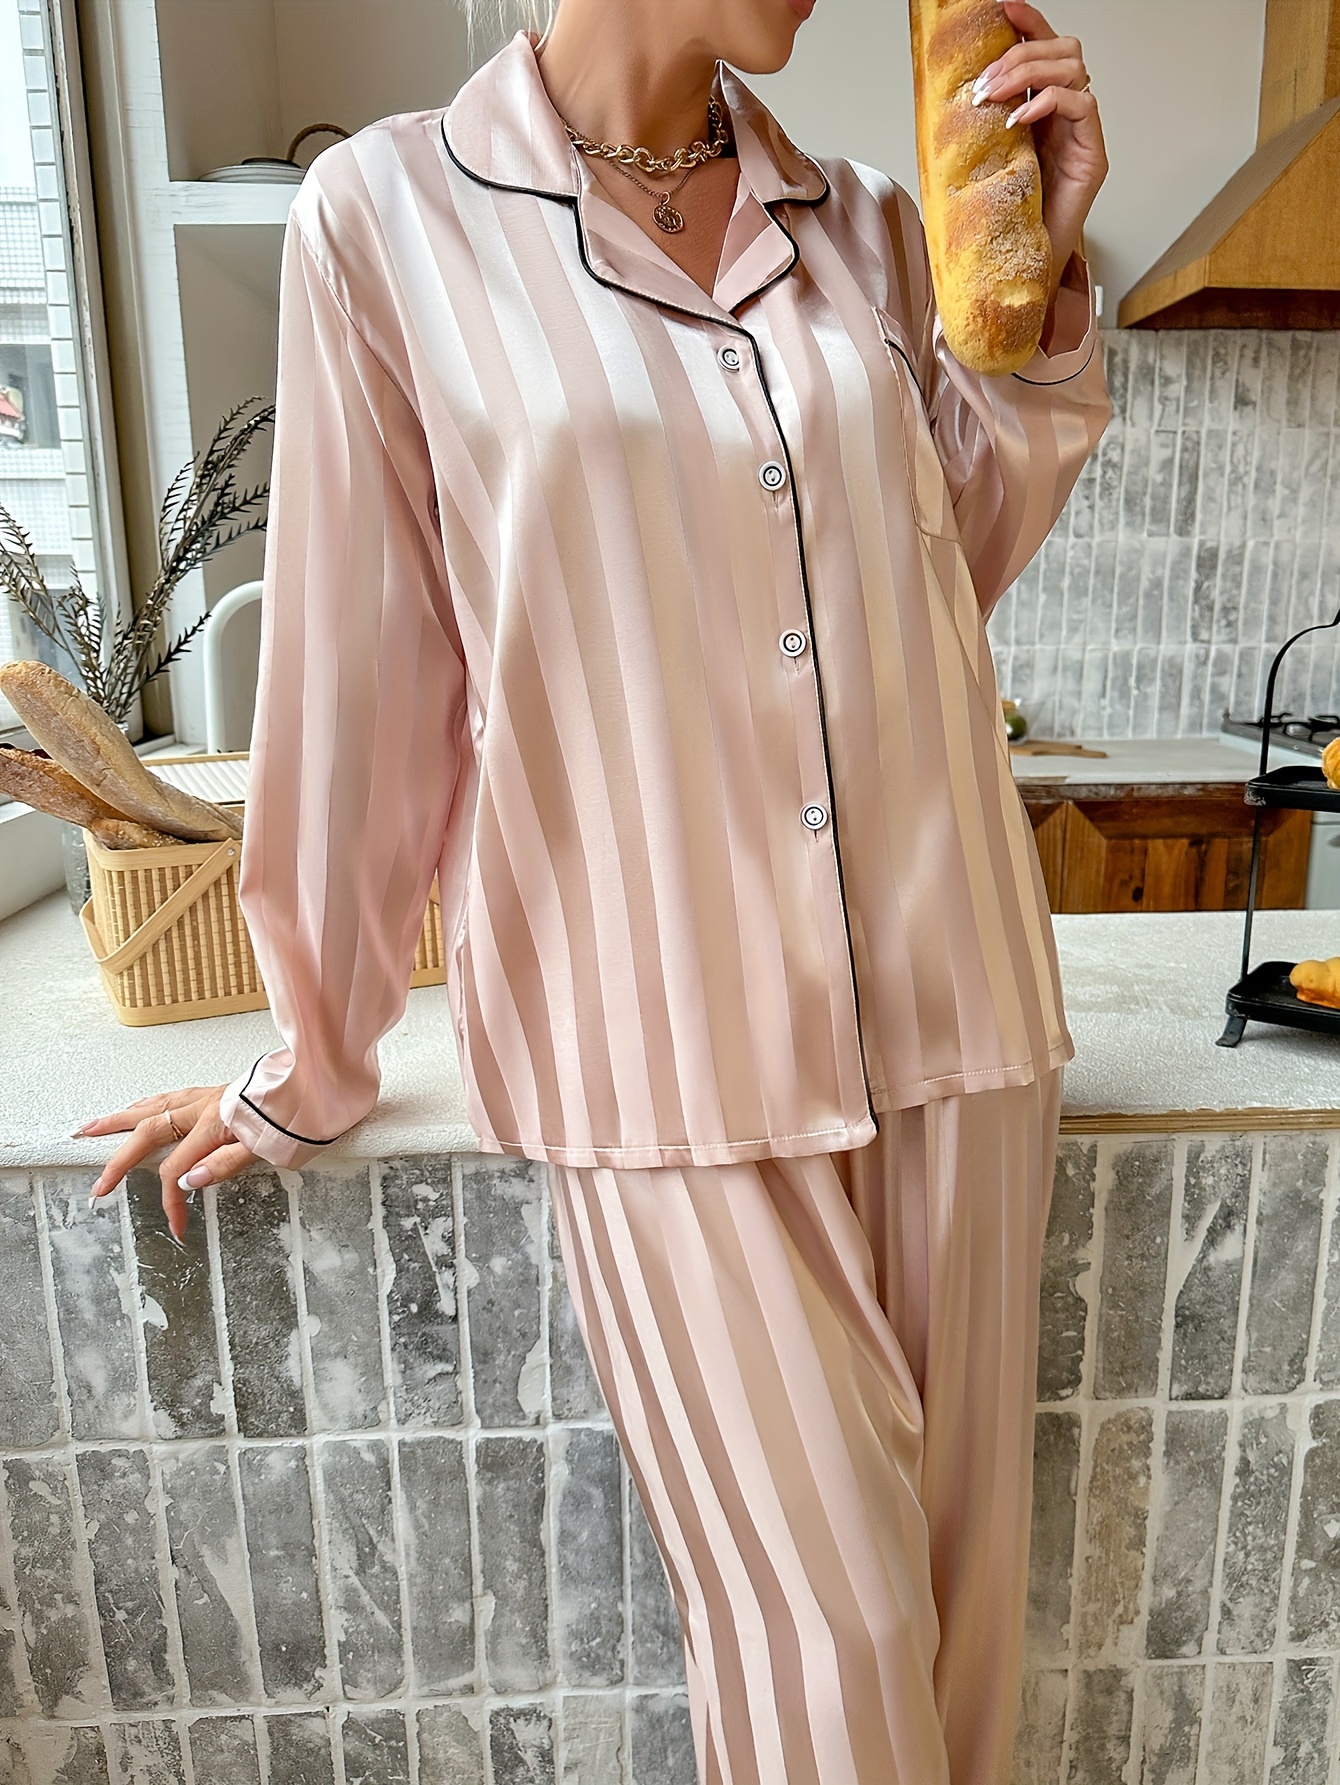 Women's Satin Pajama Set Soft Loose Striped Long Sleeve Button Down Shirt  and Elastic Waist Pants Set Loungewear (Beige, S) at  Women's  Clothing store